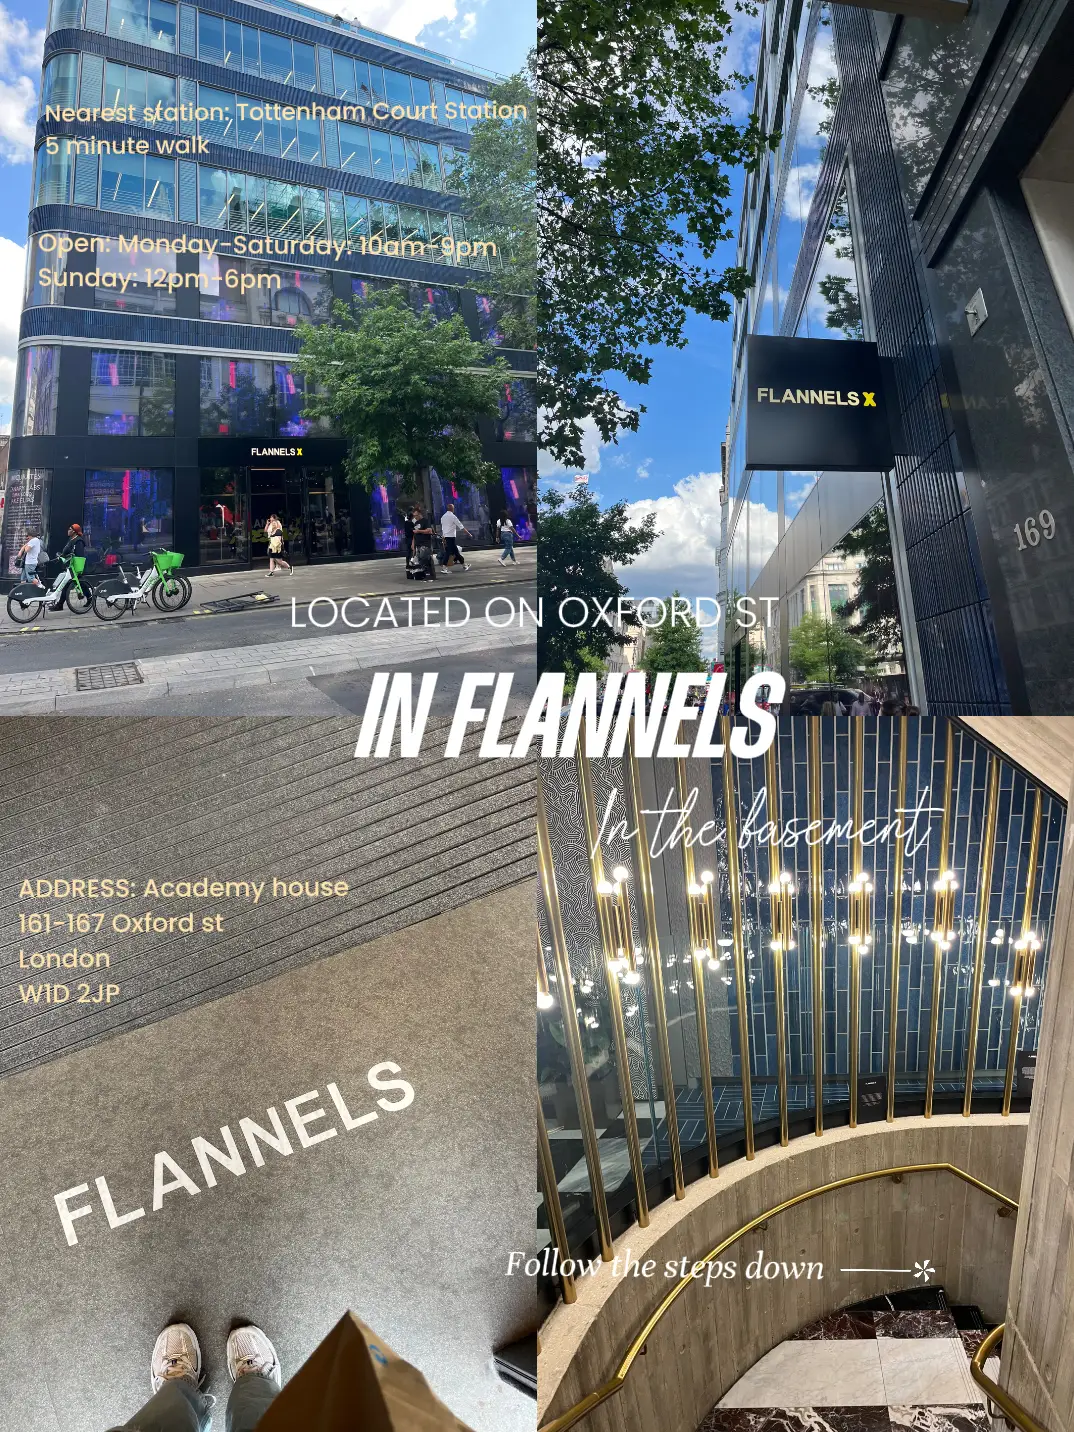 Flannels X - Oxford St Store Events